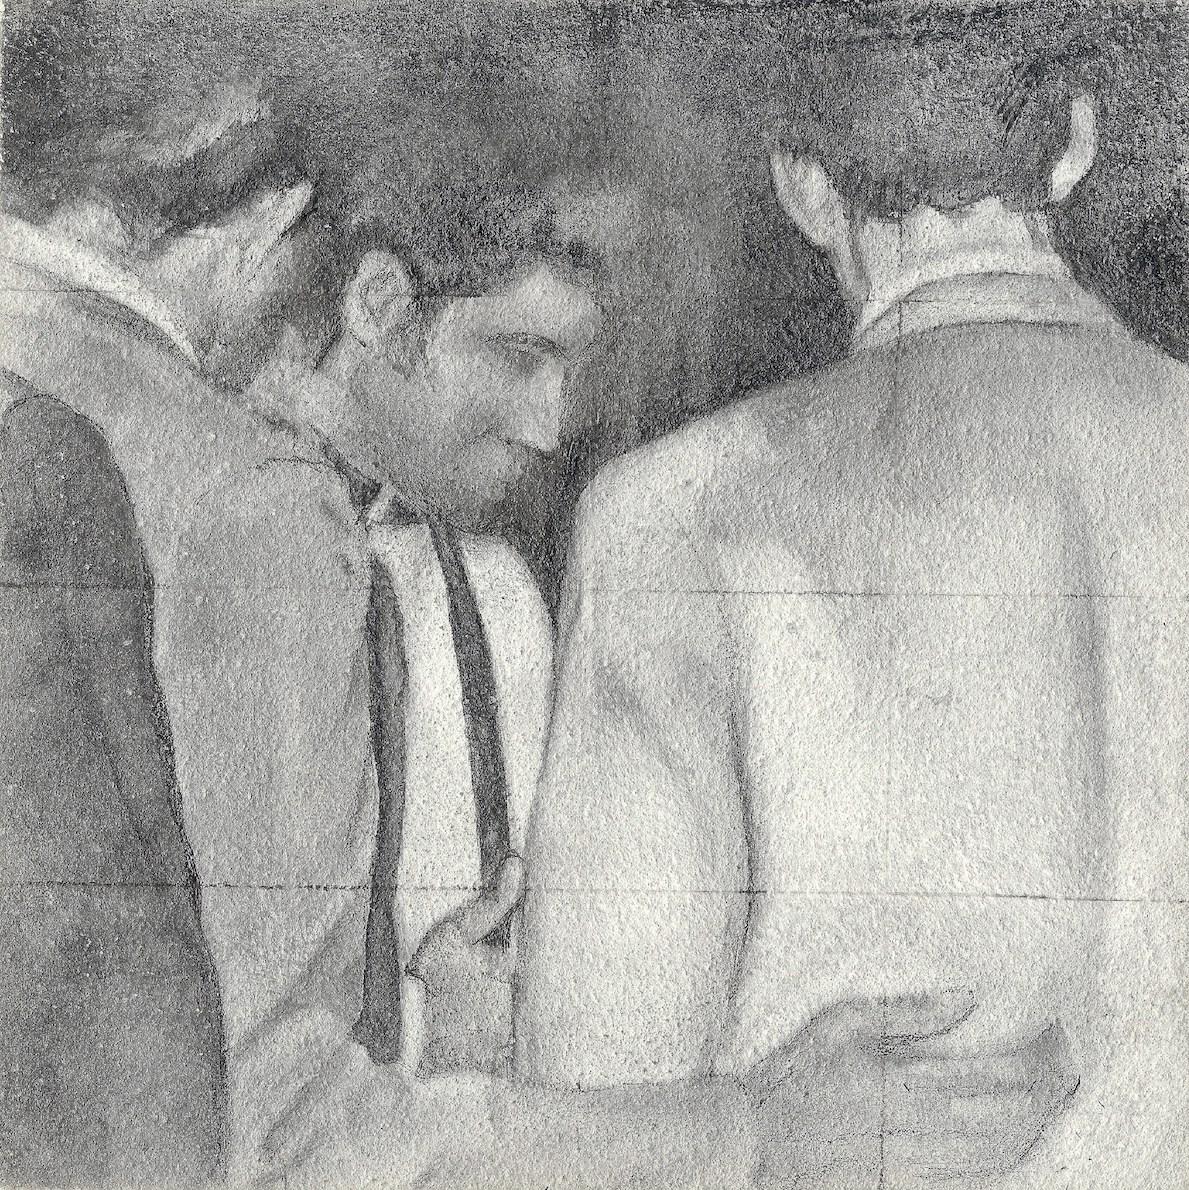 Rick Sindt Figurative Painting - Testimony - Original Black and White Graphite Drawing, Group of Men in Suits